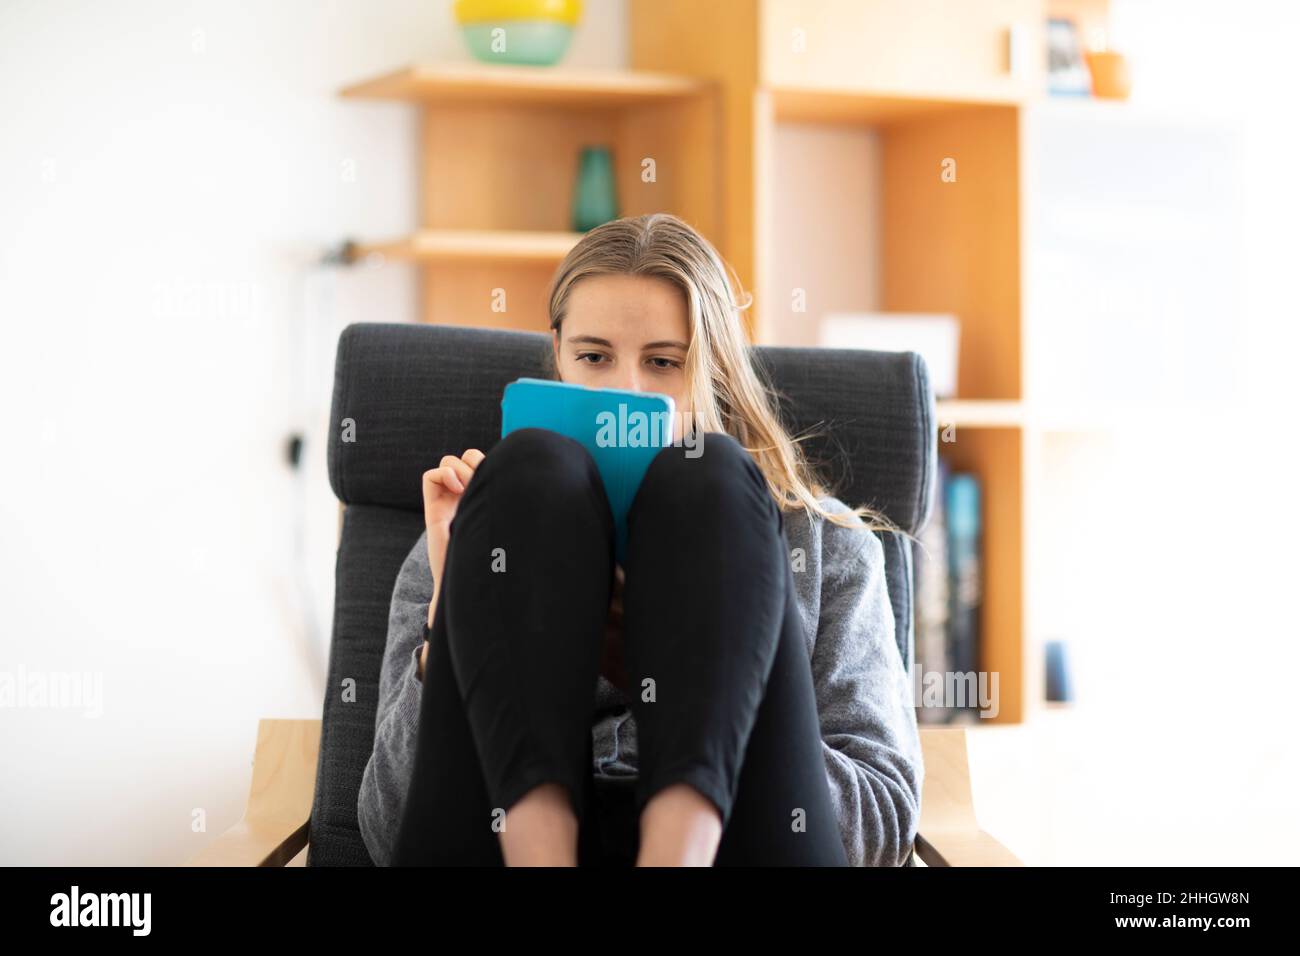 Young woman using digital tablet at home Stock Photo